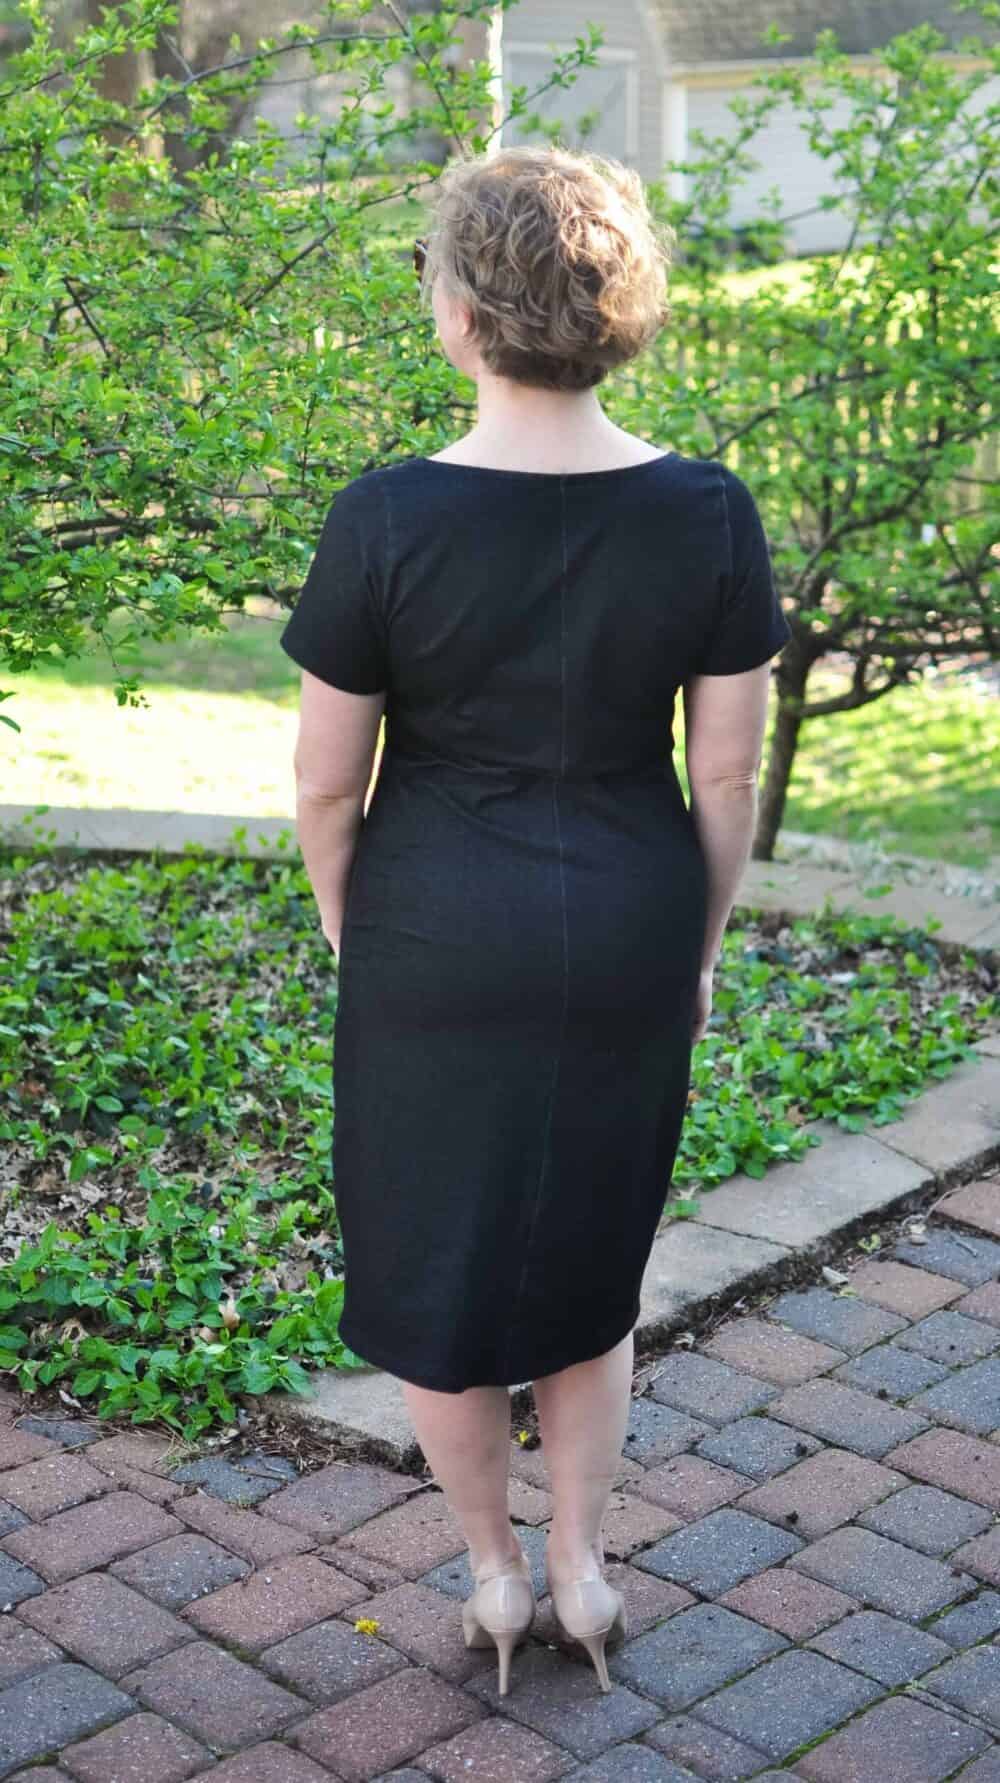 Knit sheath dress sewing pattern. Print and download it today.